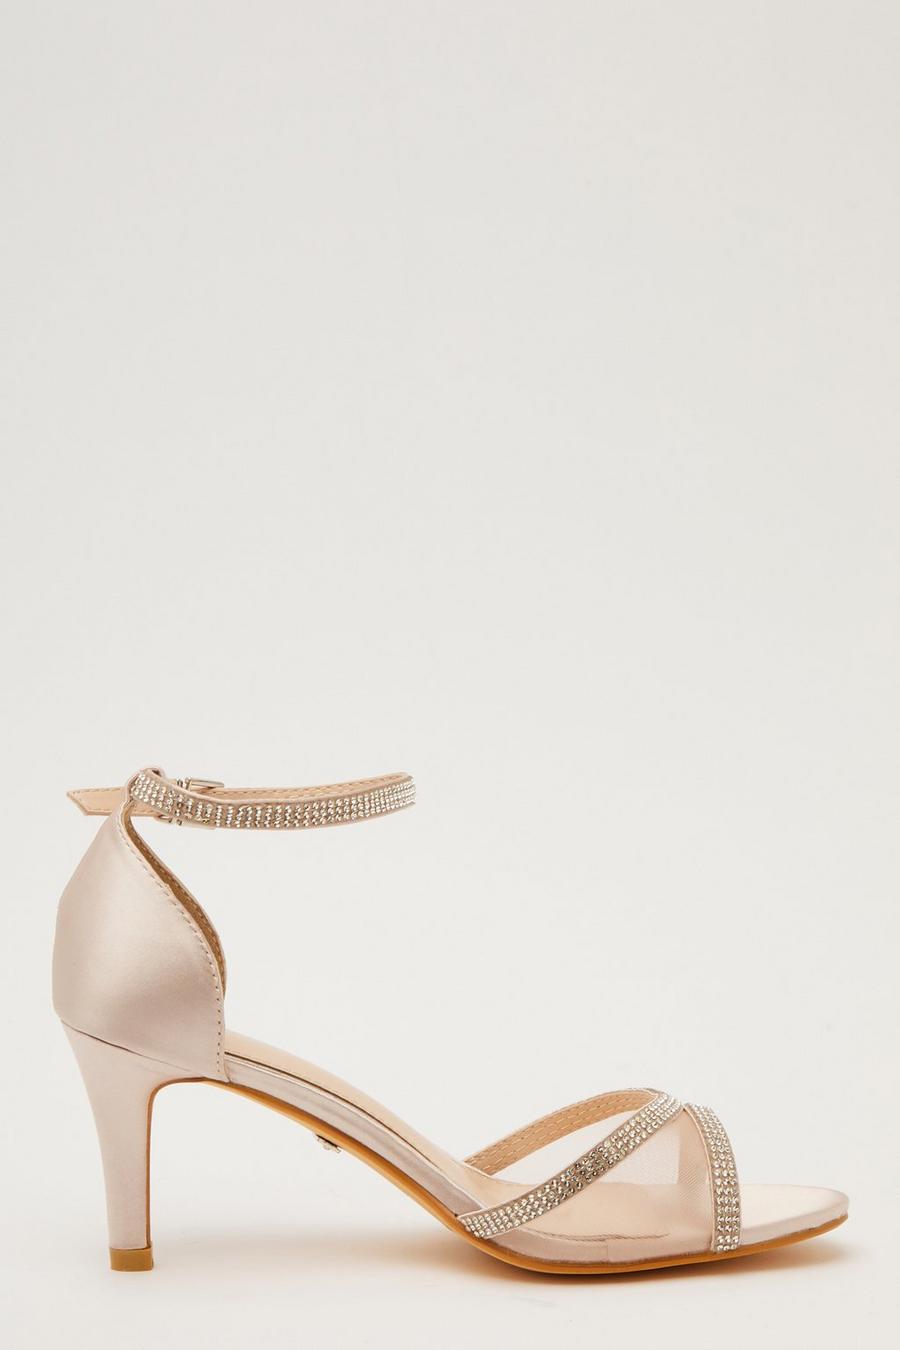 Champagne Satin Mesh Front Heeled Sandals - Quiz Clothing